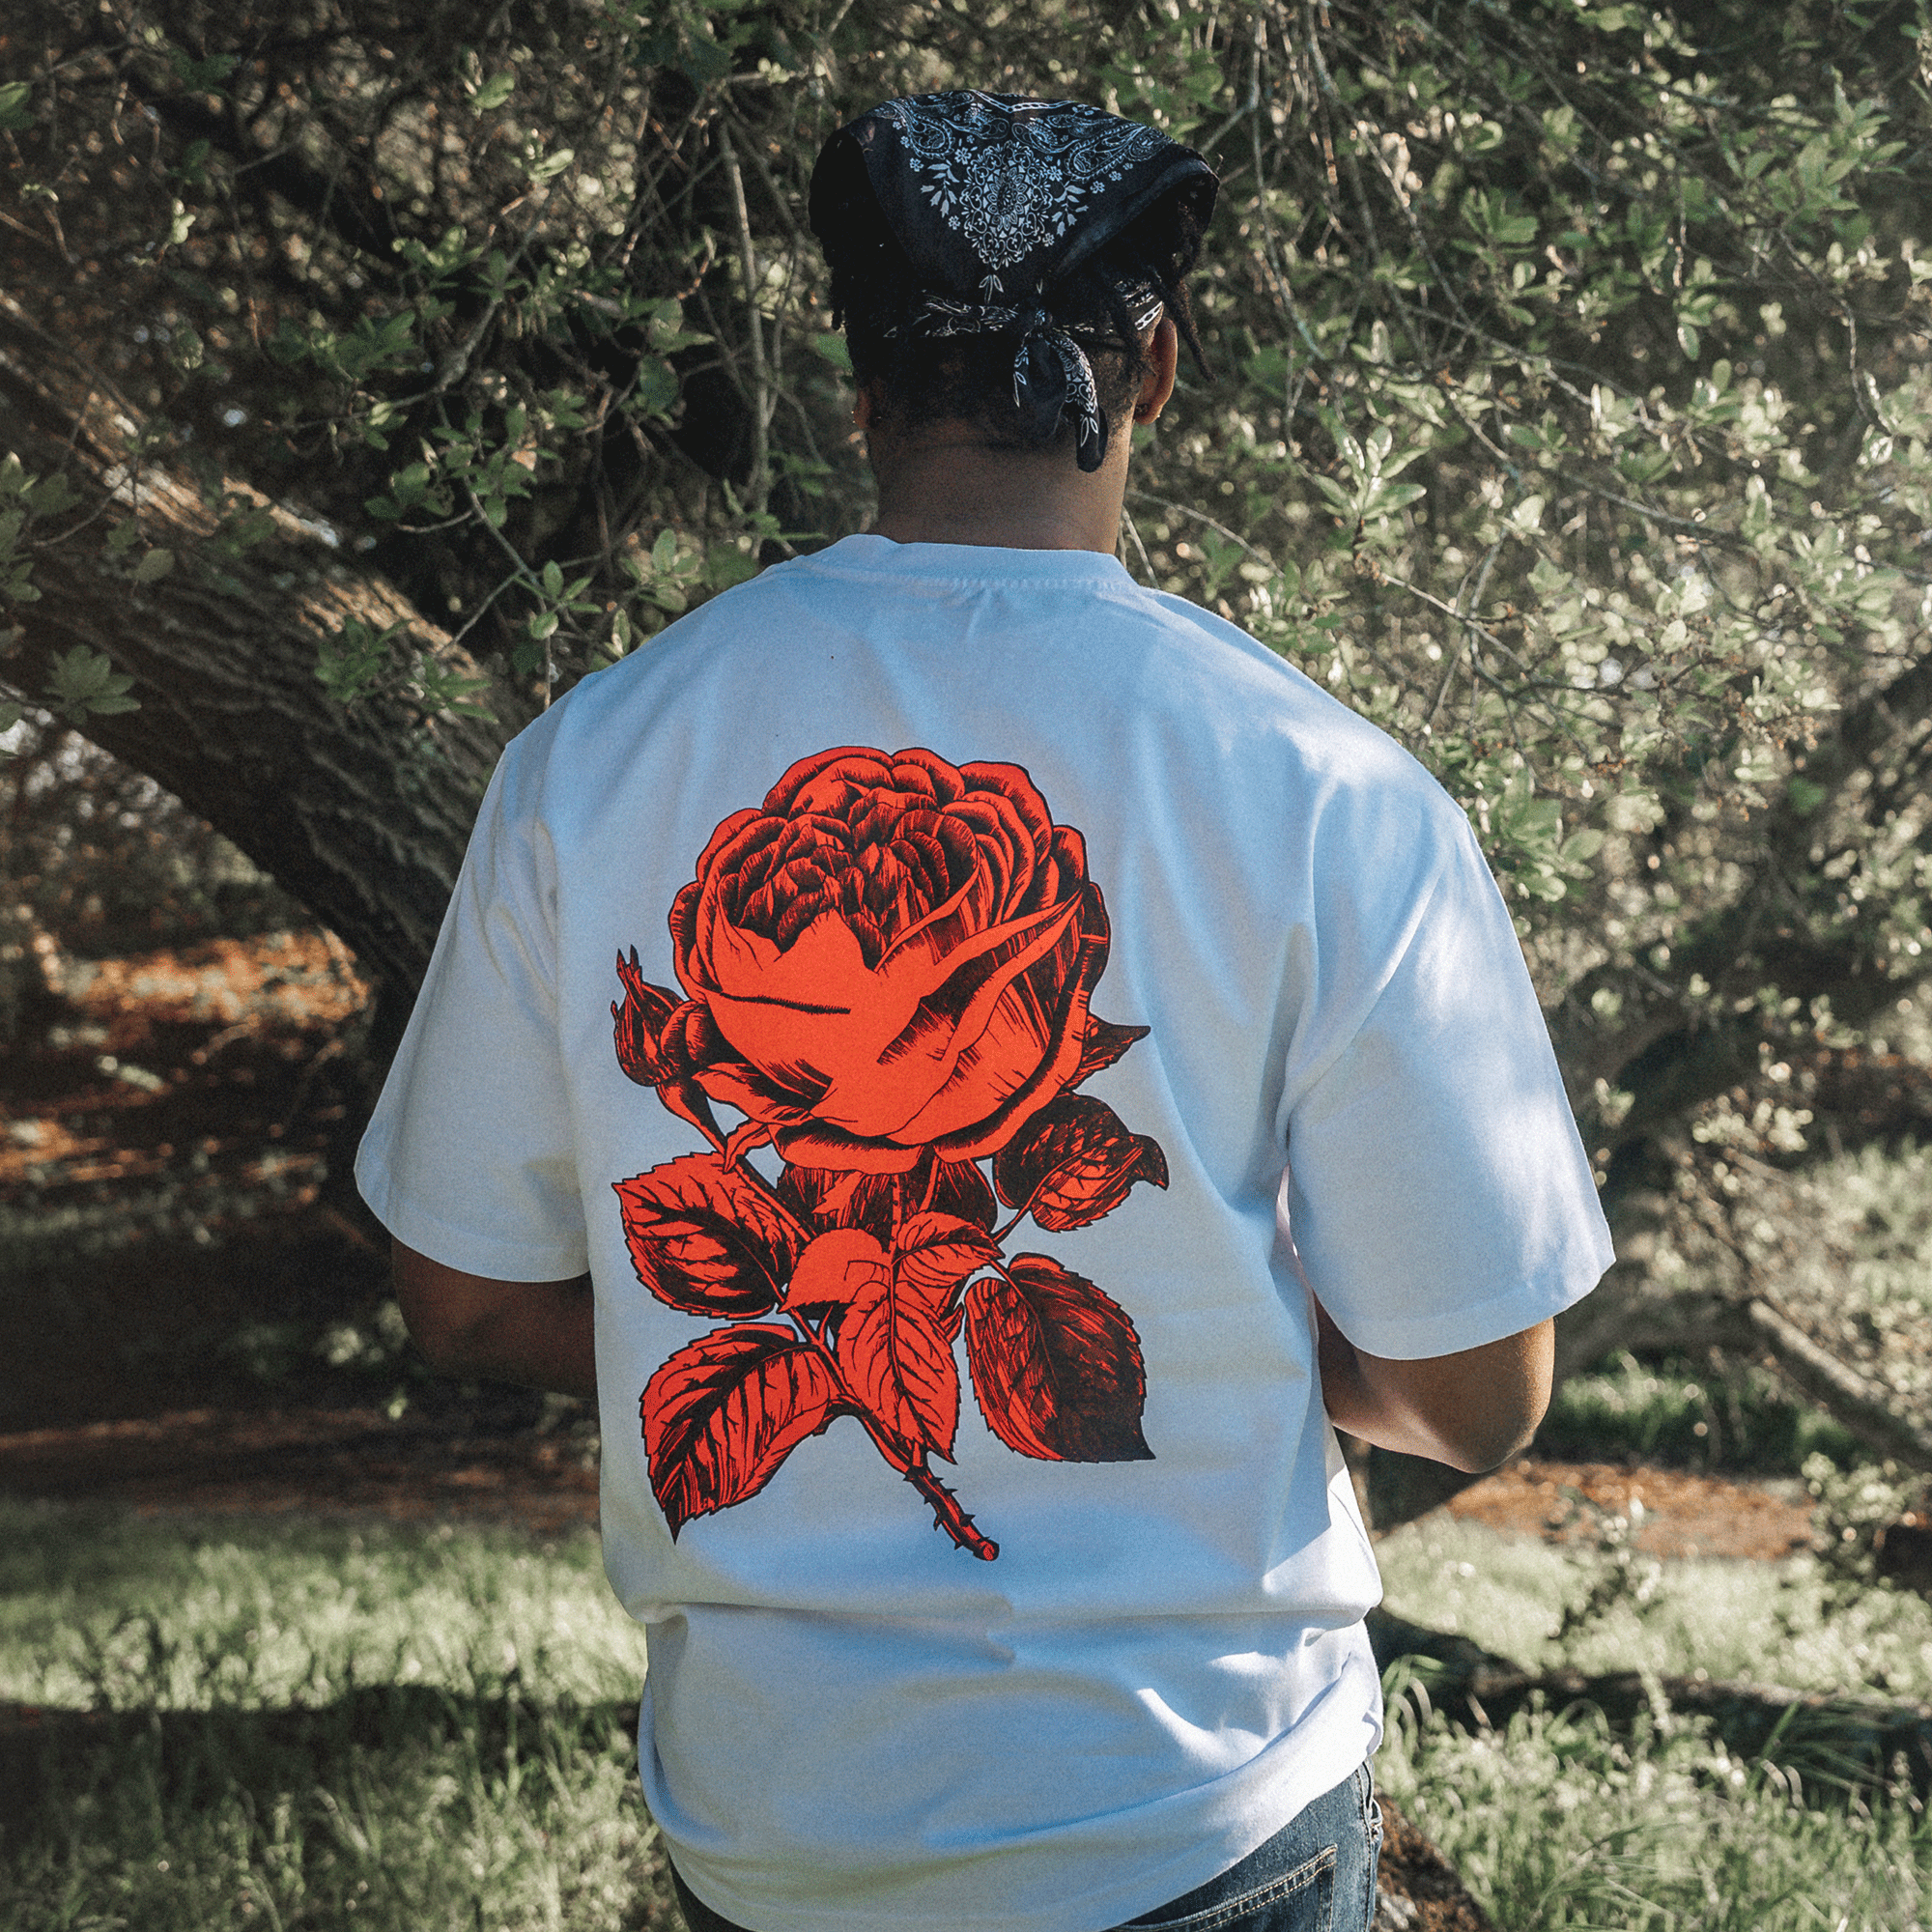 Back view of model wearing white tee with red rose printed center.